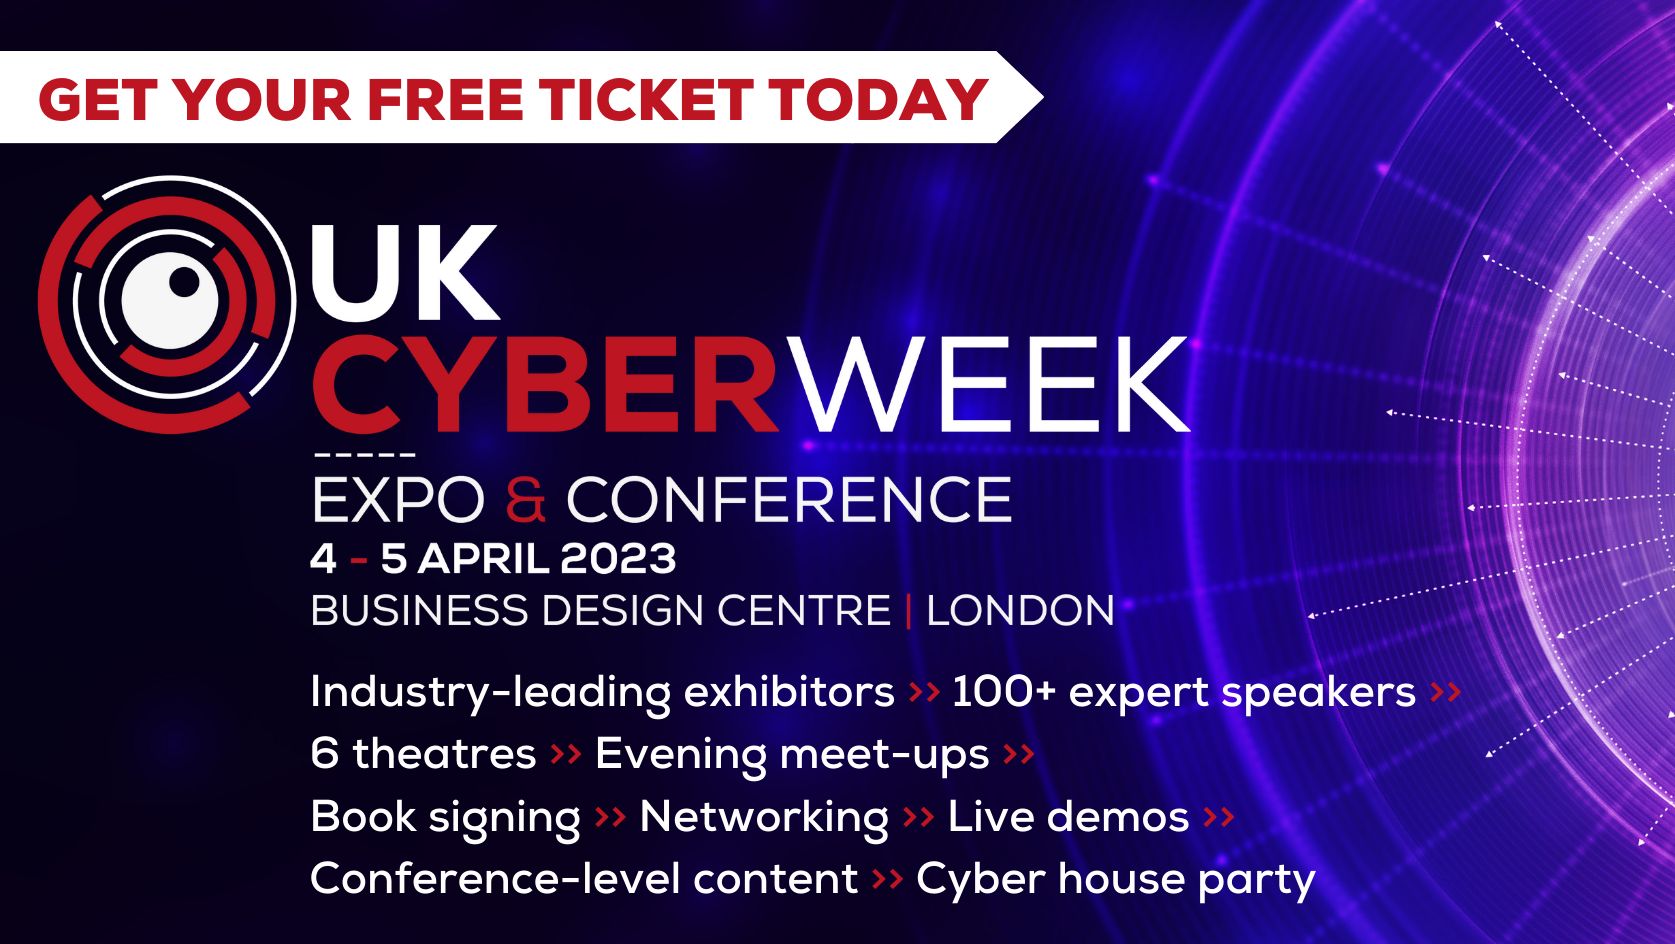 UK Cyber Week - Expo and Conference 2023, London, London, England, United Kingdom